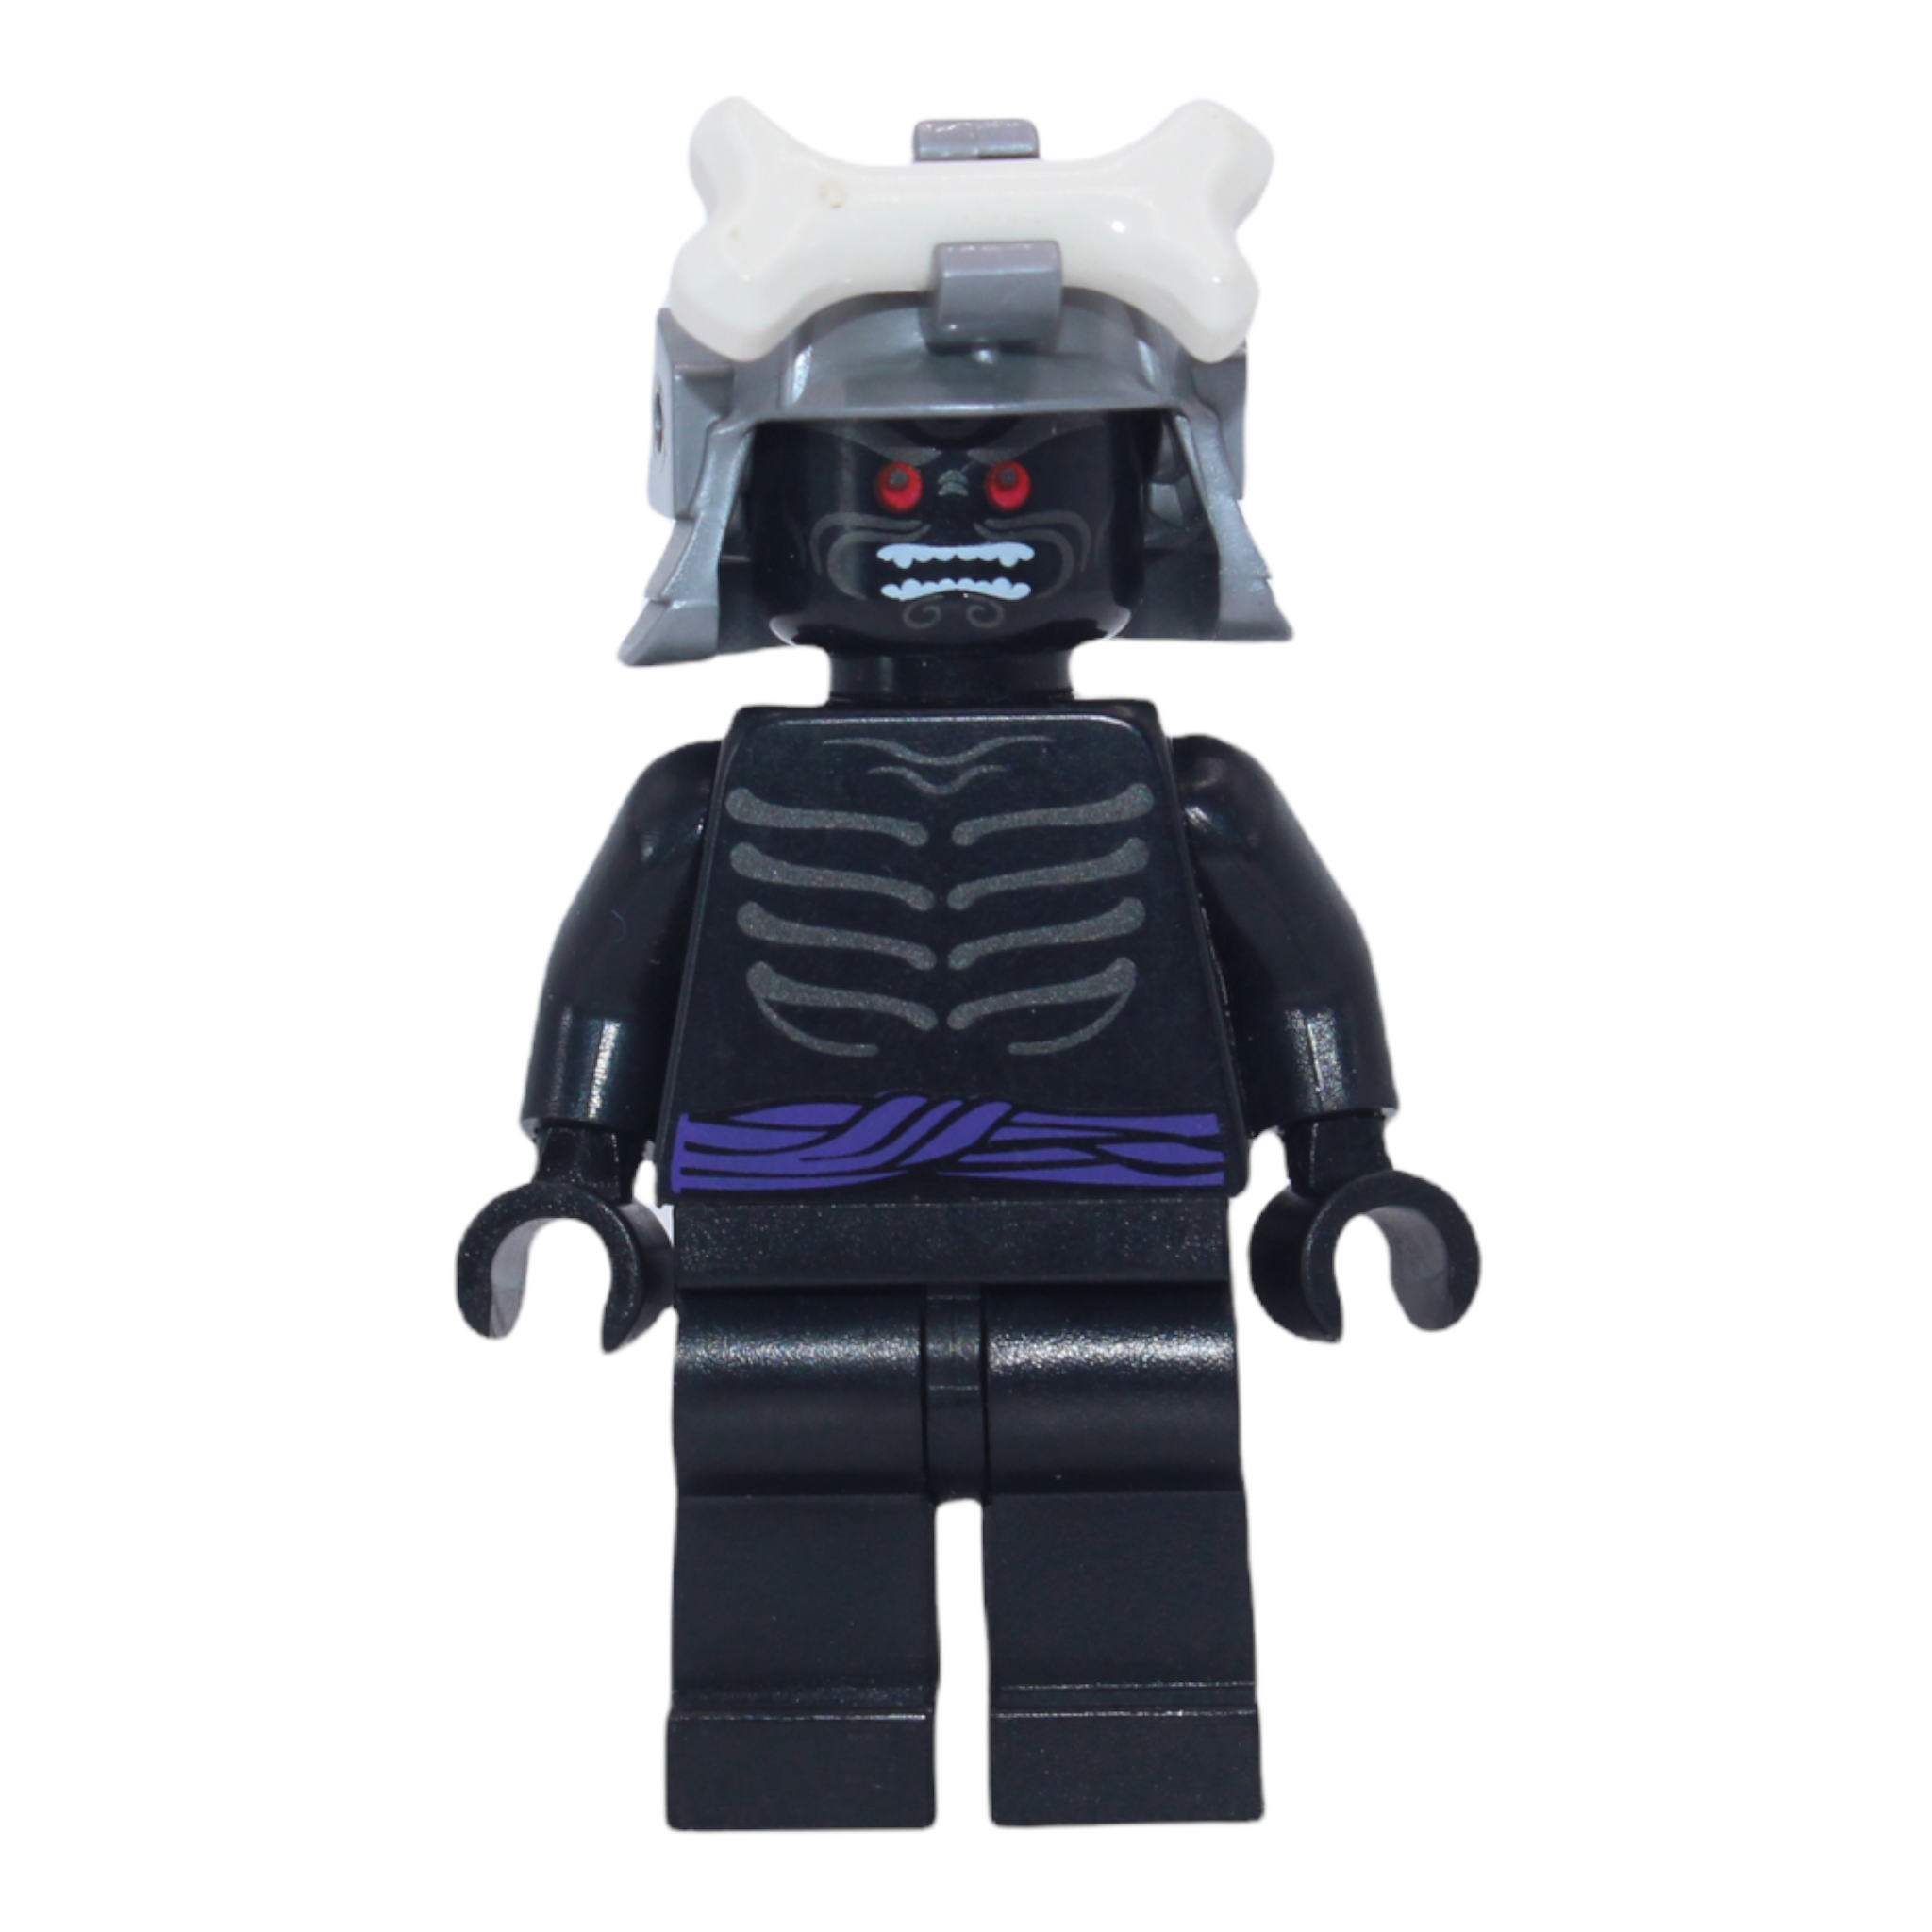 Lord Garmadon (The Golden Weapons, 2011)